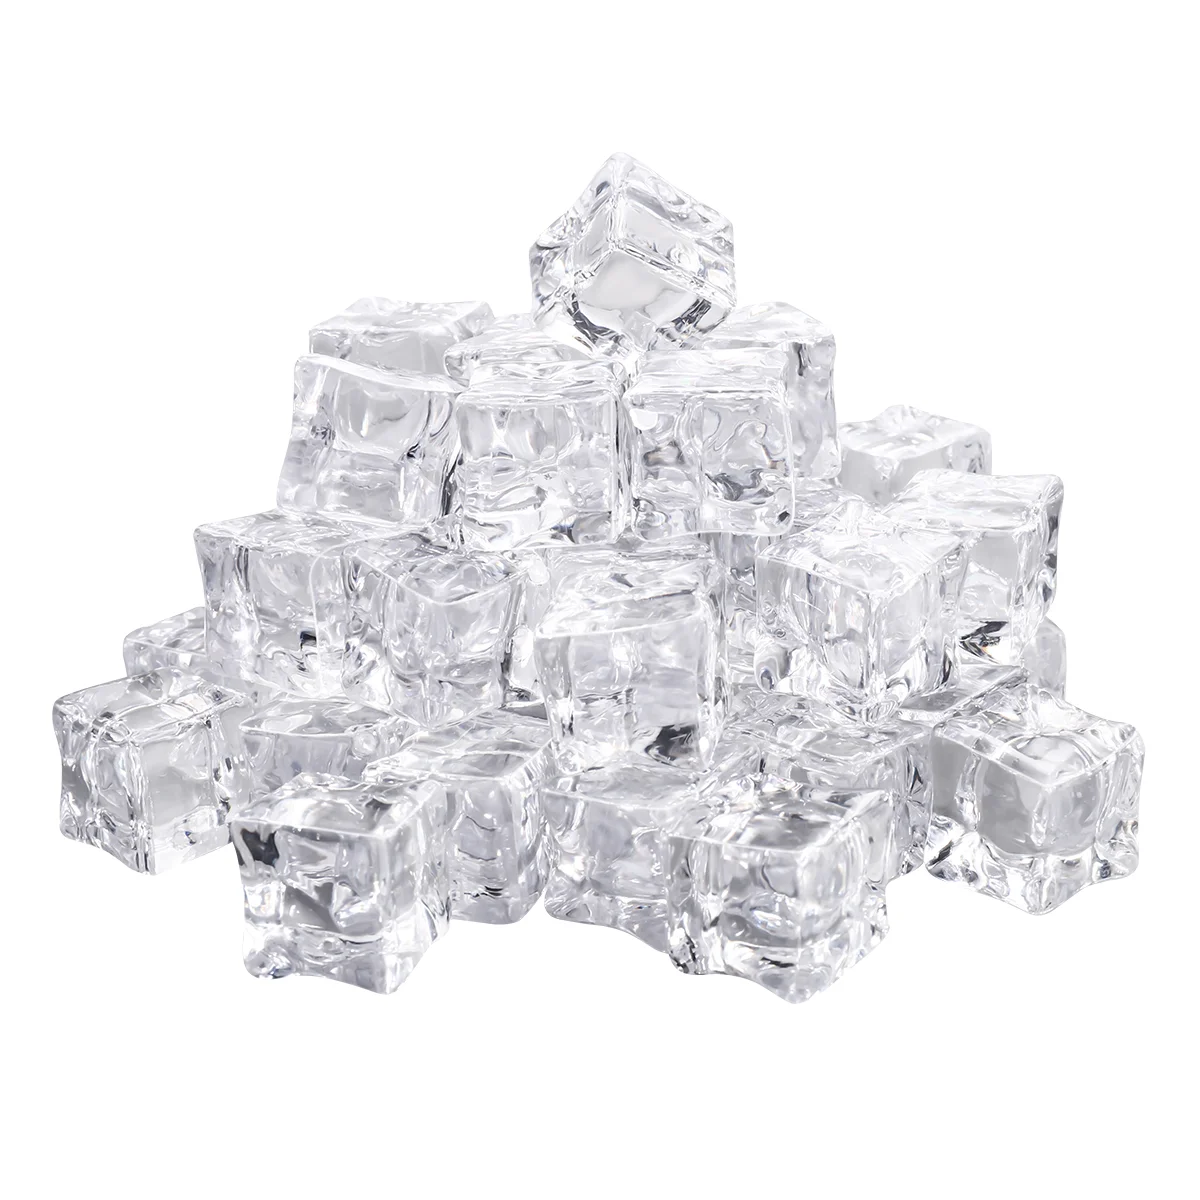 

Faux Ice Cake Decorations Clear Crystal Dazzlers Square Vase Edible Rocks Reusable Plastic Cube Trays Decorative Cubes Cakes